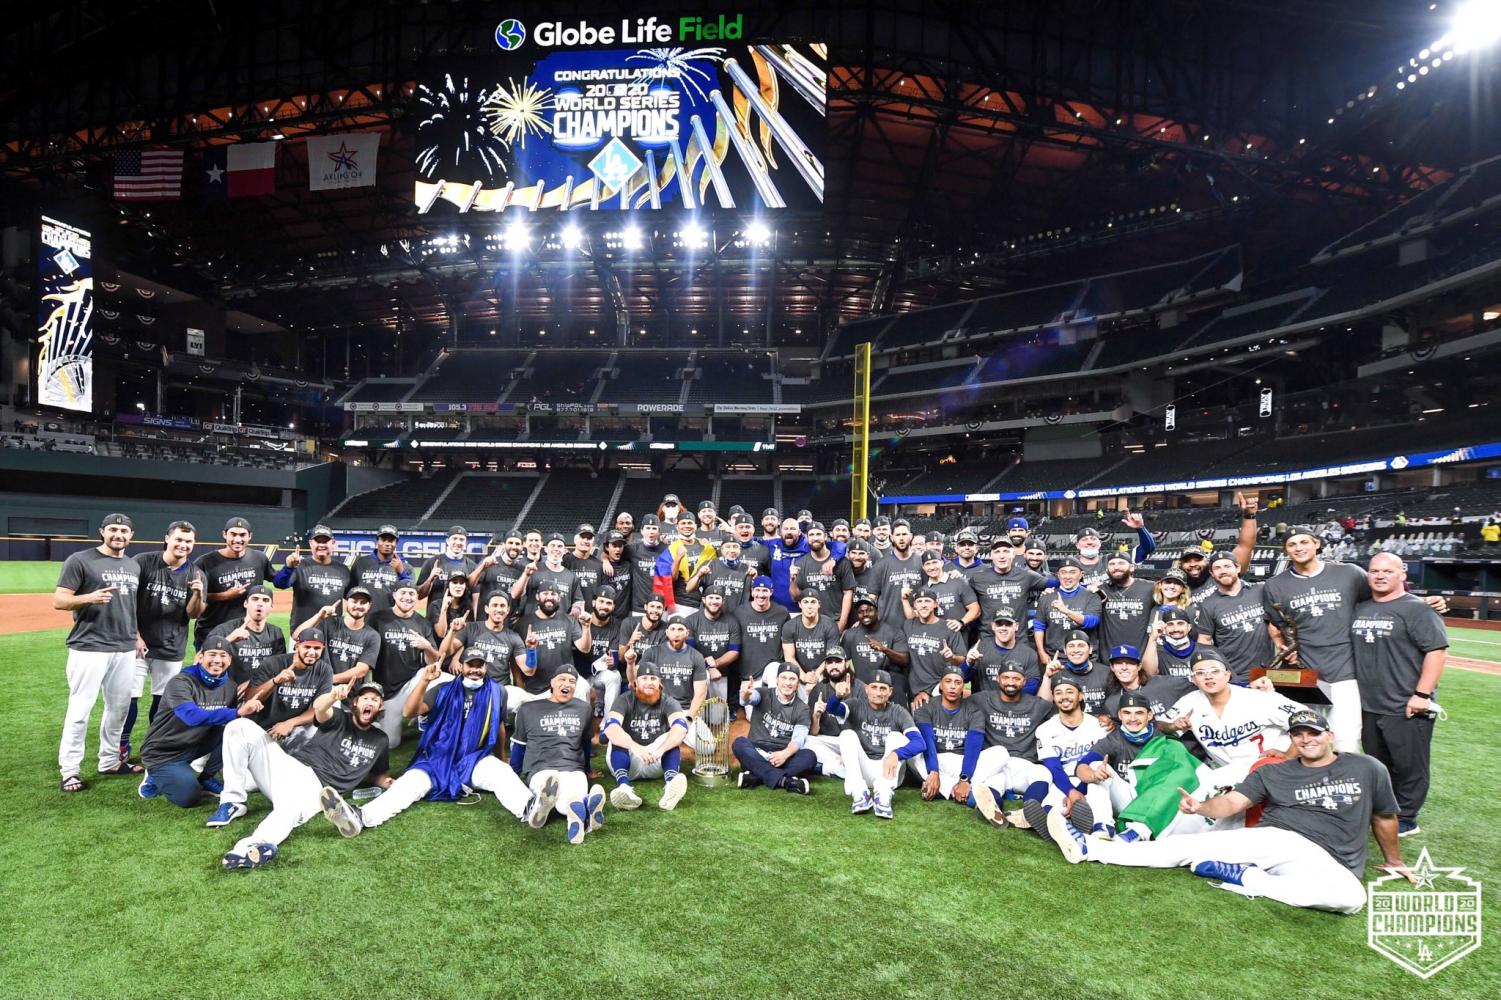 The Dodgers pose for a team photo after winning the 2020 world series on Tuesday, Oct. 27. Photos courtesy of the Dodgers twitter.